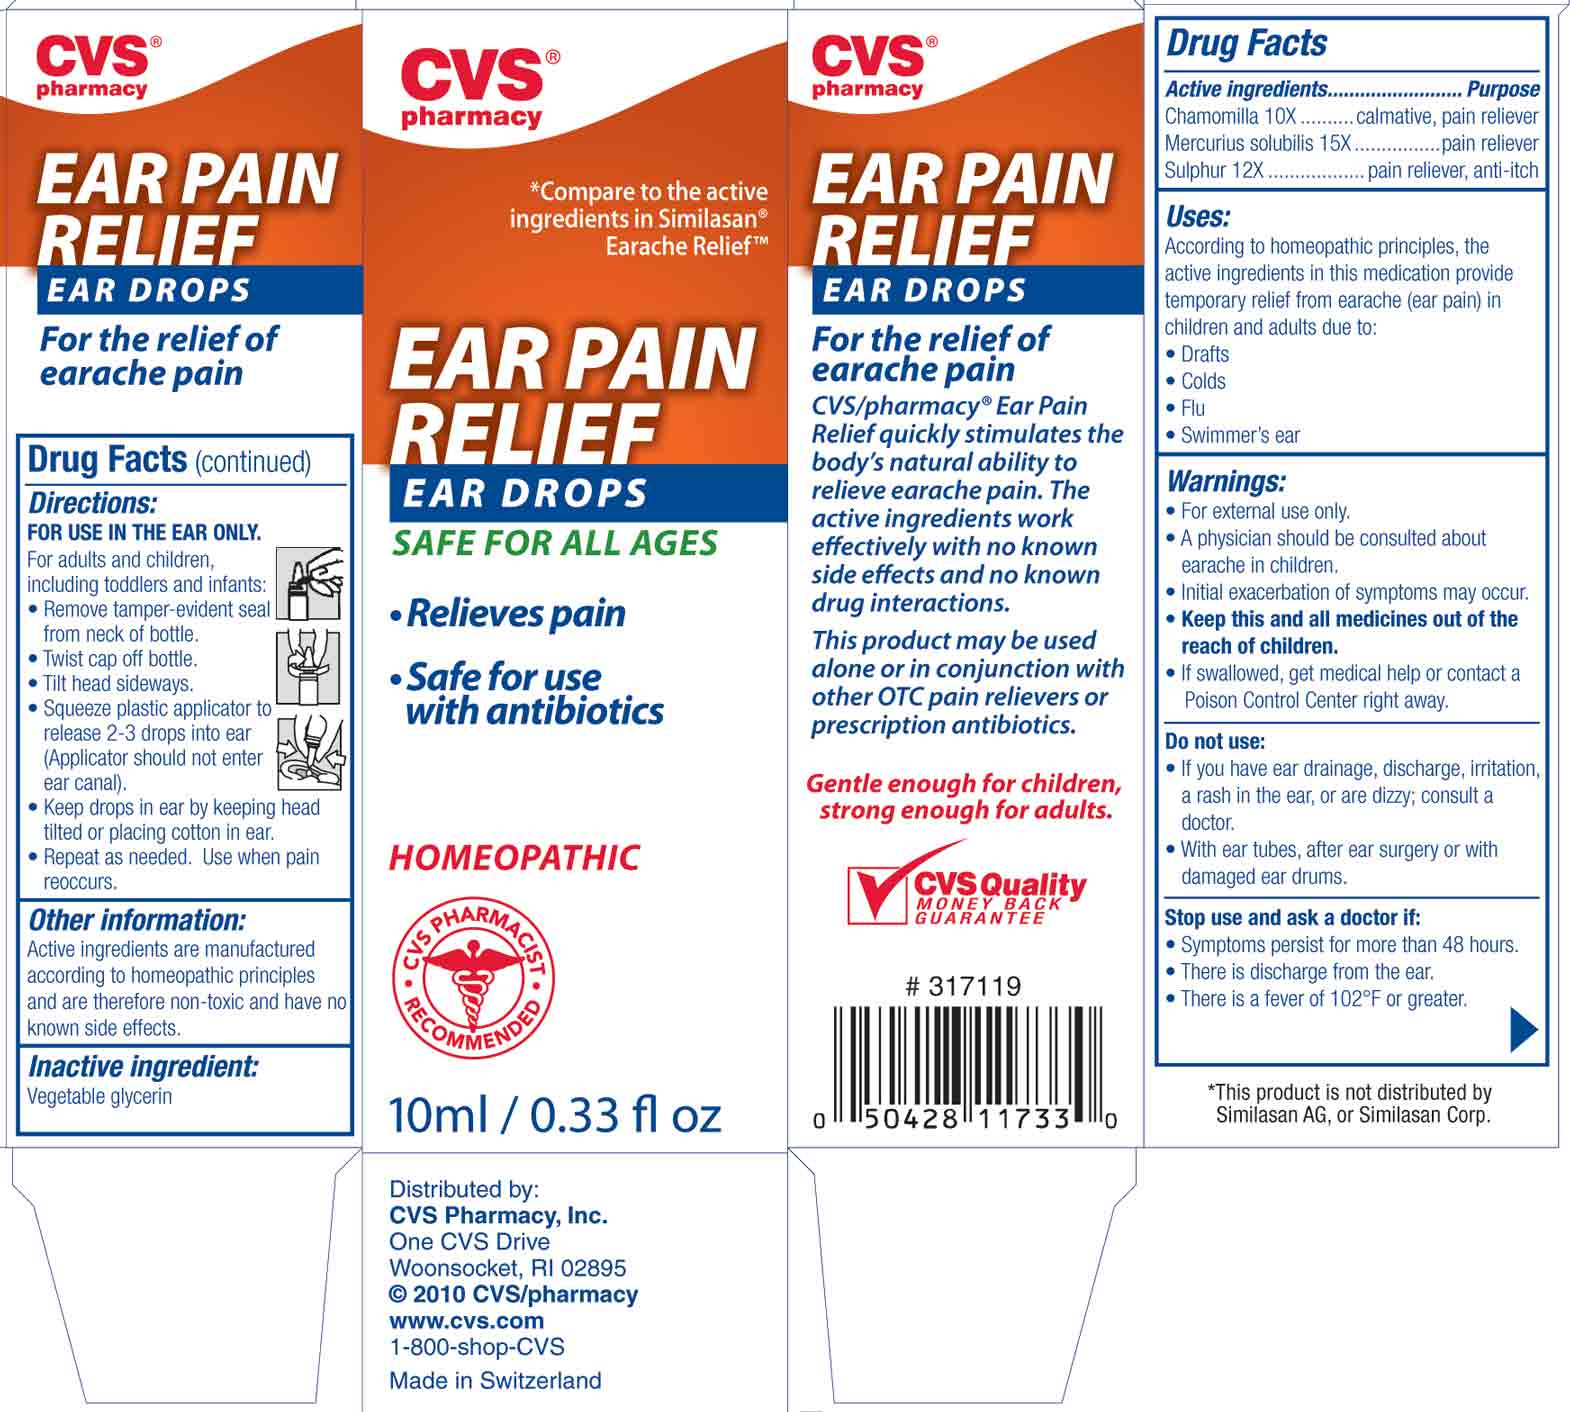 DailyMed - EAR PAIN RELIEF EAR DROPS- chamomilla and mercurius